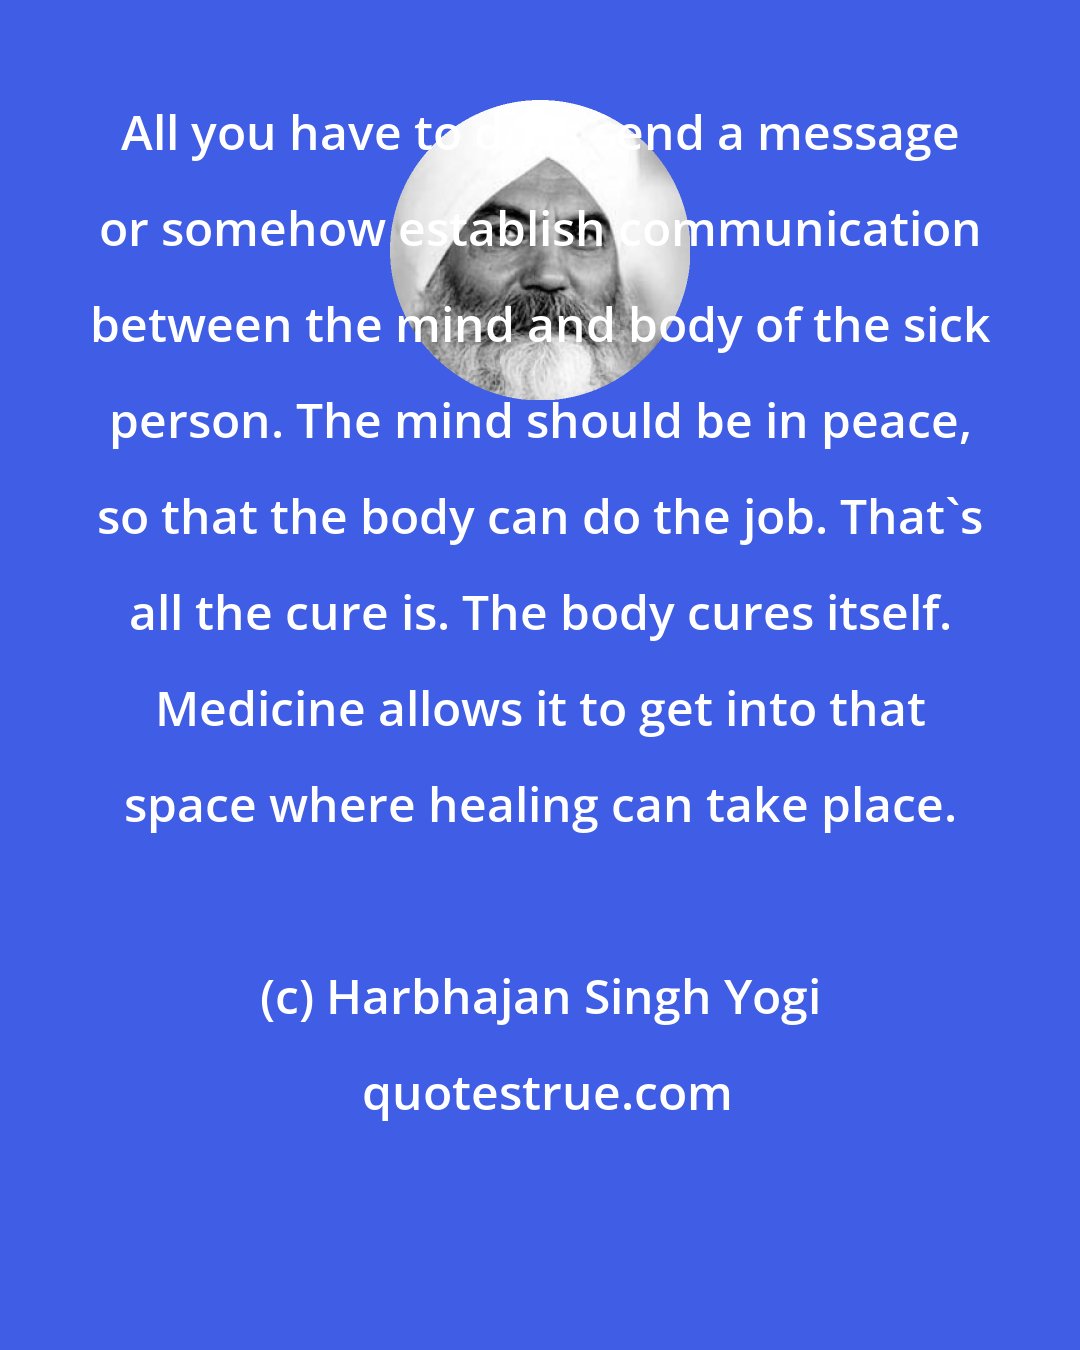 Harbhajan Singh Yogi: All you have to do is send a message or somehow establish communication between the mind and body of the sick person. The mind should be in peace, so that the body can do the job. That's all the cure is. The body cures itself. Medicine allows it to get into that space where healing can take place.